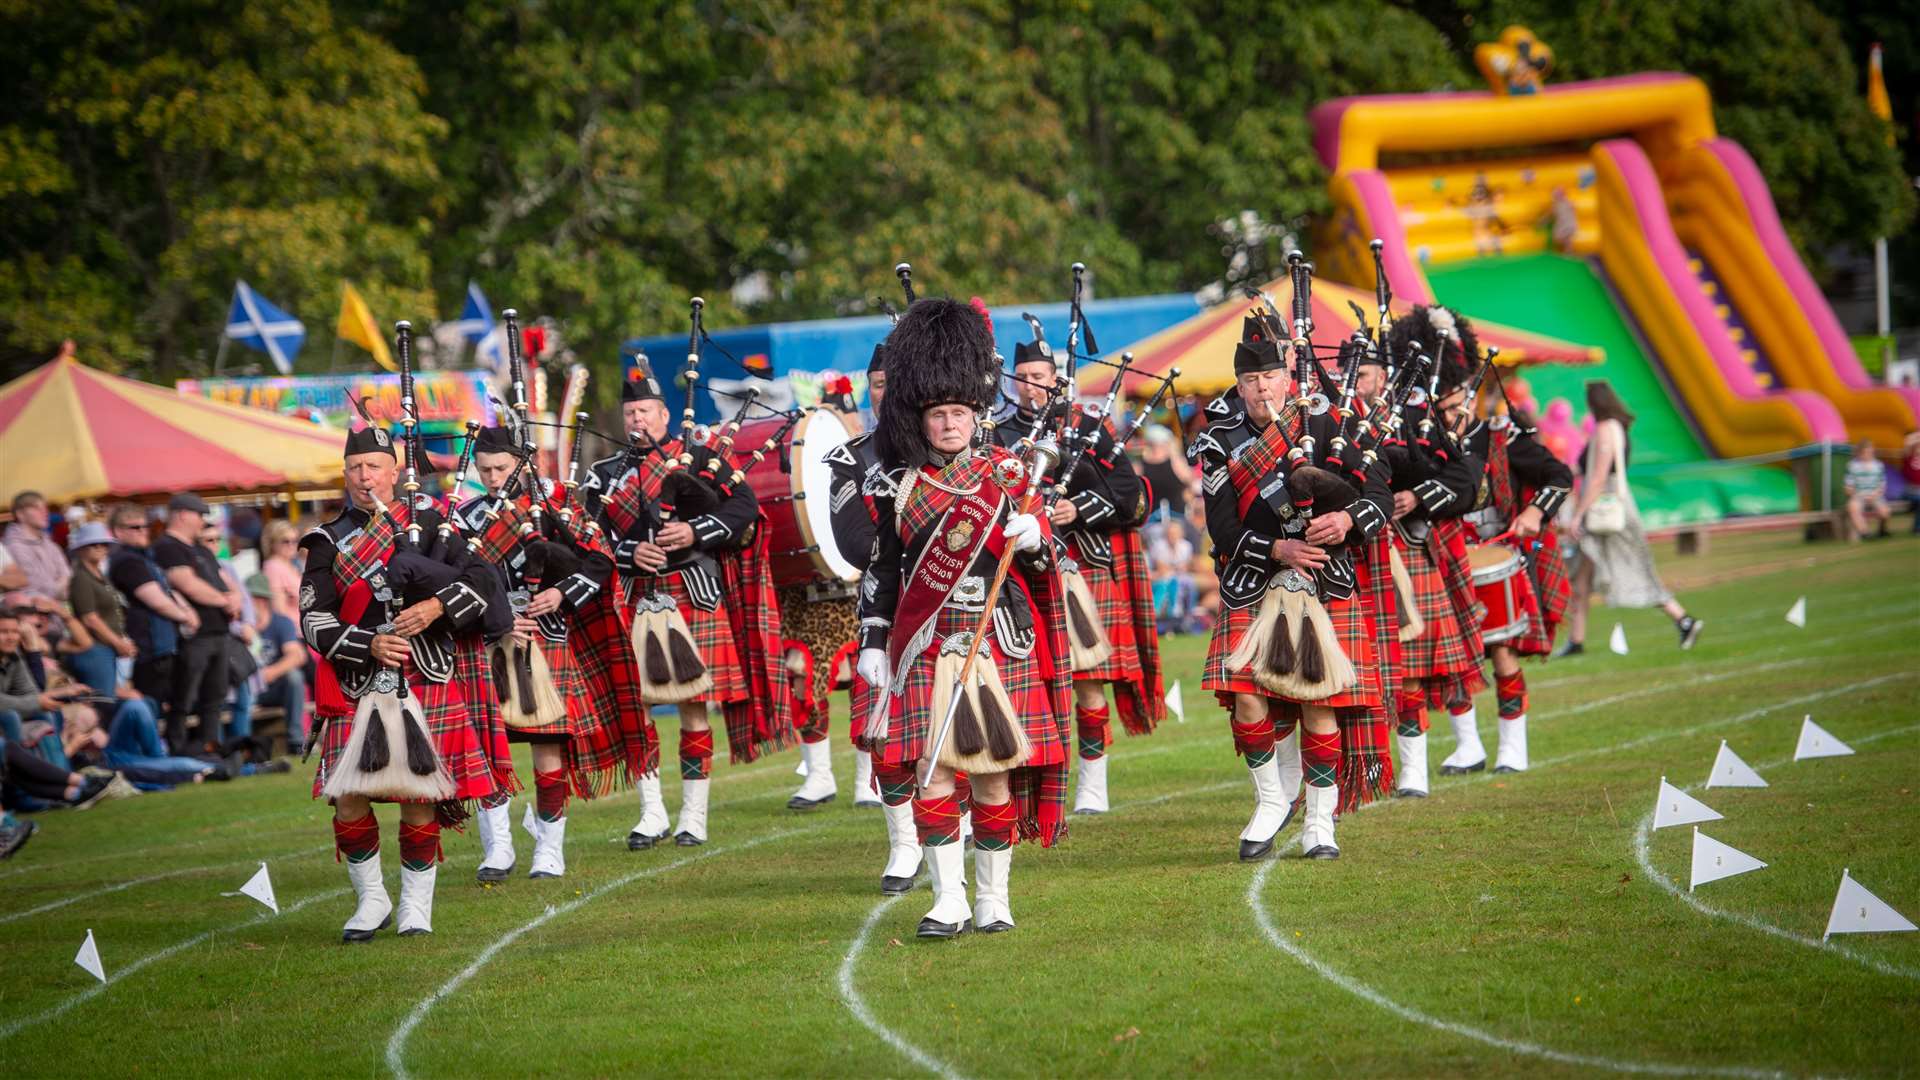 The pipe band parade is an impressive sight – and sound! Picture: Callum Mackay